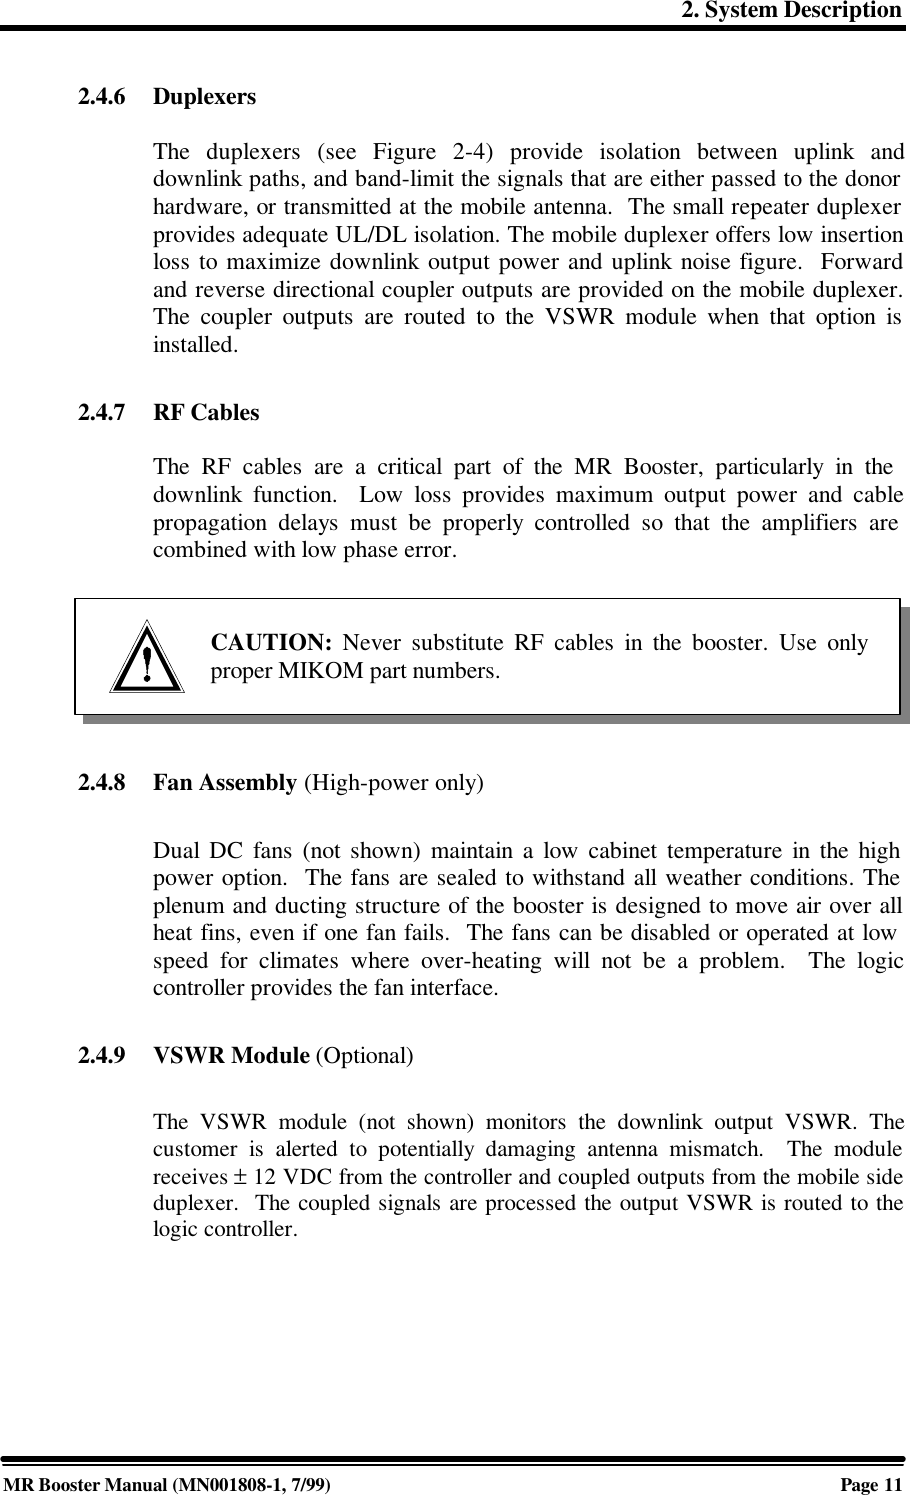 2. System DescriptionMR Booster Manual (MN001808-1, 7/99)Page 112.4.6 DuplexersThe duplexers (see Figure 2-4) provide isolation between uplink anddownlink paths, and band-limit the signals that are either passed to the donorhardware, or transmitted at the mobile antenna.  The small repeater duplexerprovides adequate UL/DL isolation. The mobile duplexer offers low insertionloss to maximize downlink output power and uplink noise figure.  Forwardand reverse directional coupler outputs are provided on the mobile duplexer.The coupler outputs are routed to the VSWR module when that option isinstalled.2.4.7 RF CablesThe RF cables are a critical part of the MR Booster, particularly in thedownlink function.  Low loss provides maximum output power and cablepropagation delays must be properly controlled so that the amplifiers arecombined with low phase error.2.4.8 Fan Assembly (High-power only)Dual DC fans (not shown) maintain a low cabinet temperature in the highpower option.  The fans are sealed to withstand all weather conditions. Theplenum and ducting structure of the booster is designed to move air over allheat fins, even if one fan fails.  The fans can be disabled or operated at lowspeed for climates where over-heating will not be a problem.  The logiccontroller provides the fan interface.2.4.9 VSWR Module (Optional)The VSWR module (not shown) monitors the downlink output VSWR. Thecustomer is alerted to potentially damaging antenna mismatch.  The modulereceives ± 12 VDC from the controller and coupled outputs from the mobile sideduplexer.  The coupled signals are processed the output VSWR is routed to thelogic controller.CAUTION: Never substitute RF cables in the booster. Use onlyproper MIKOM part numbers.